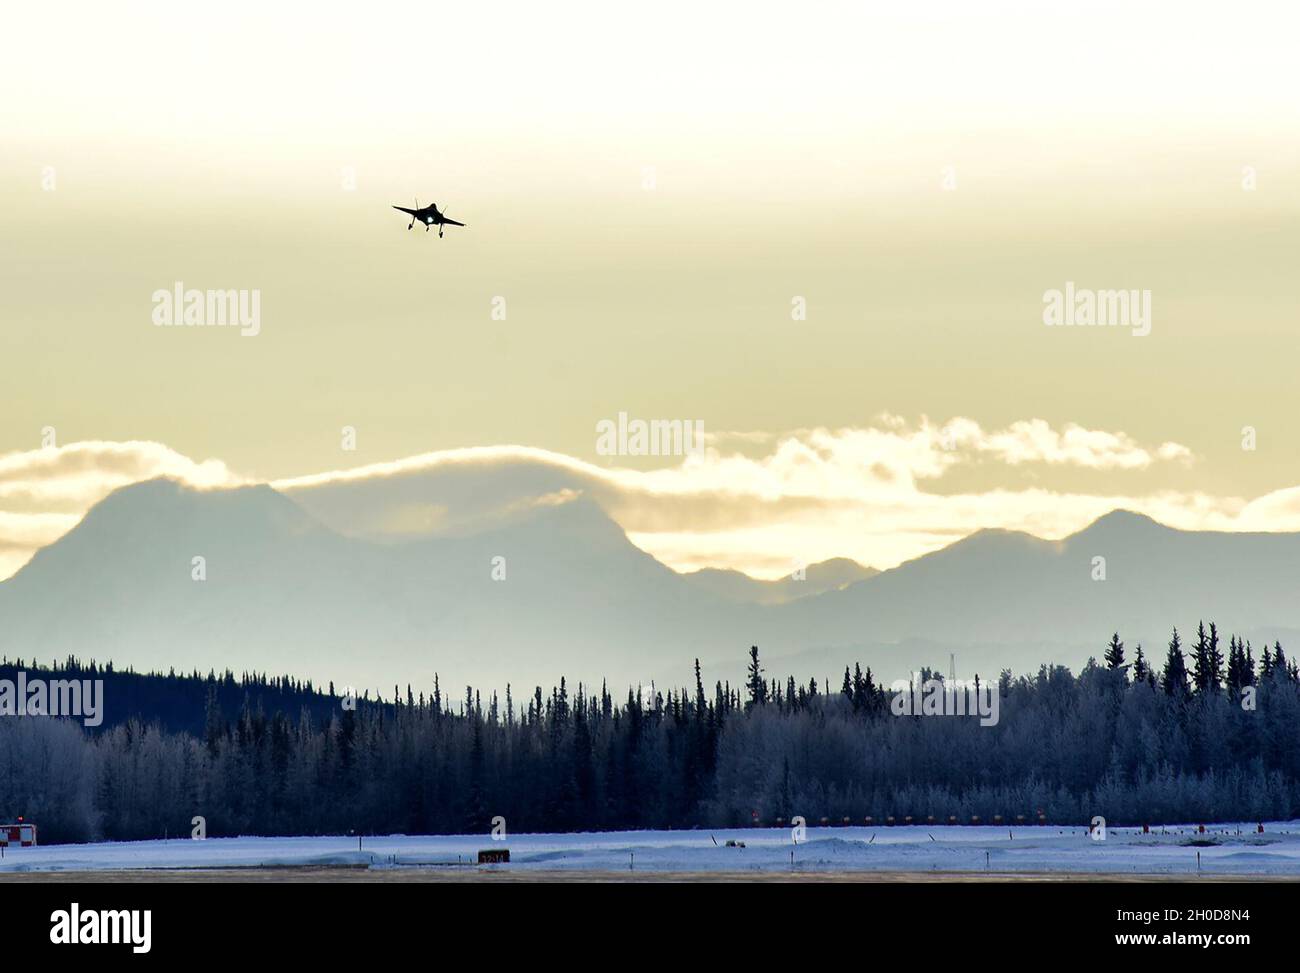 An F-35A Lightning II flys over Eielson Air Force Base, Alaska, Jan. 29, 2021 preparing to land. By the end of 2021 Alaska will have the highest concentration of combat-coded 5th generation aircraft with 54 F-35As total. Stock Photo